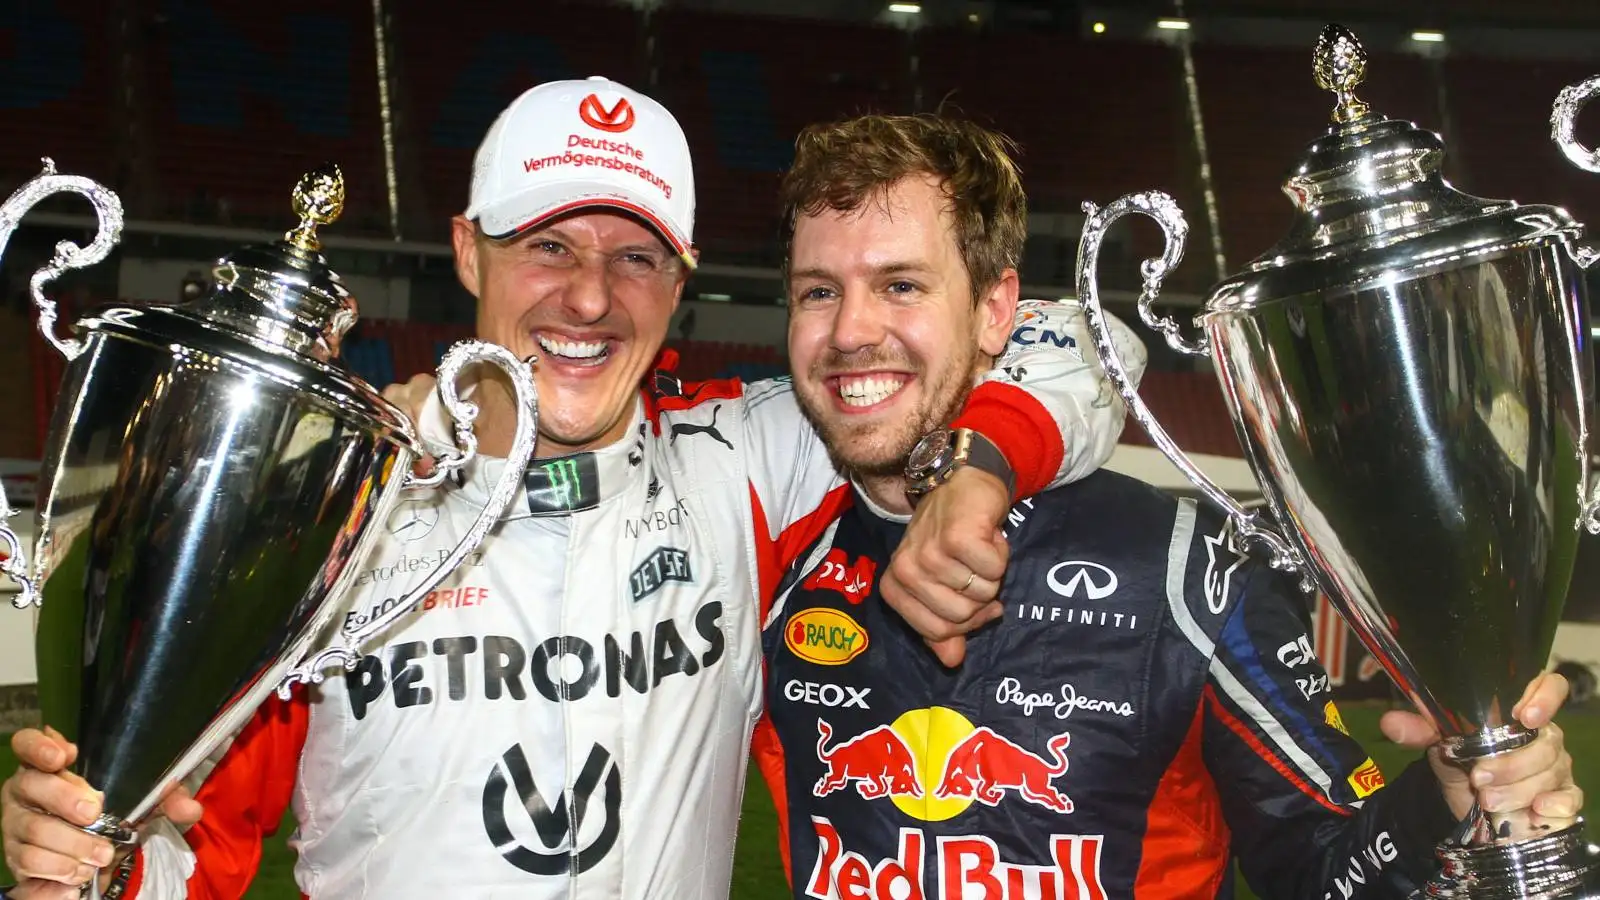 Michael Schumacher and Sebastian Vettel with Race of Champions trophies.